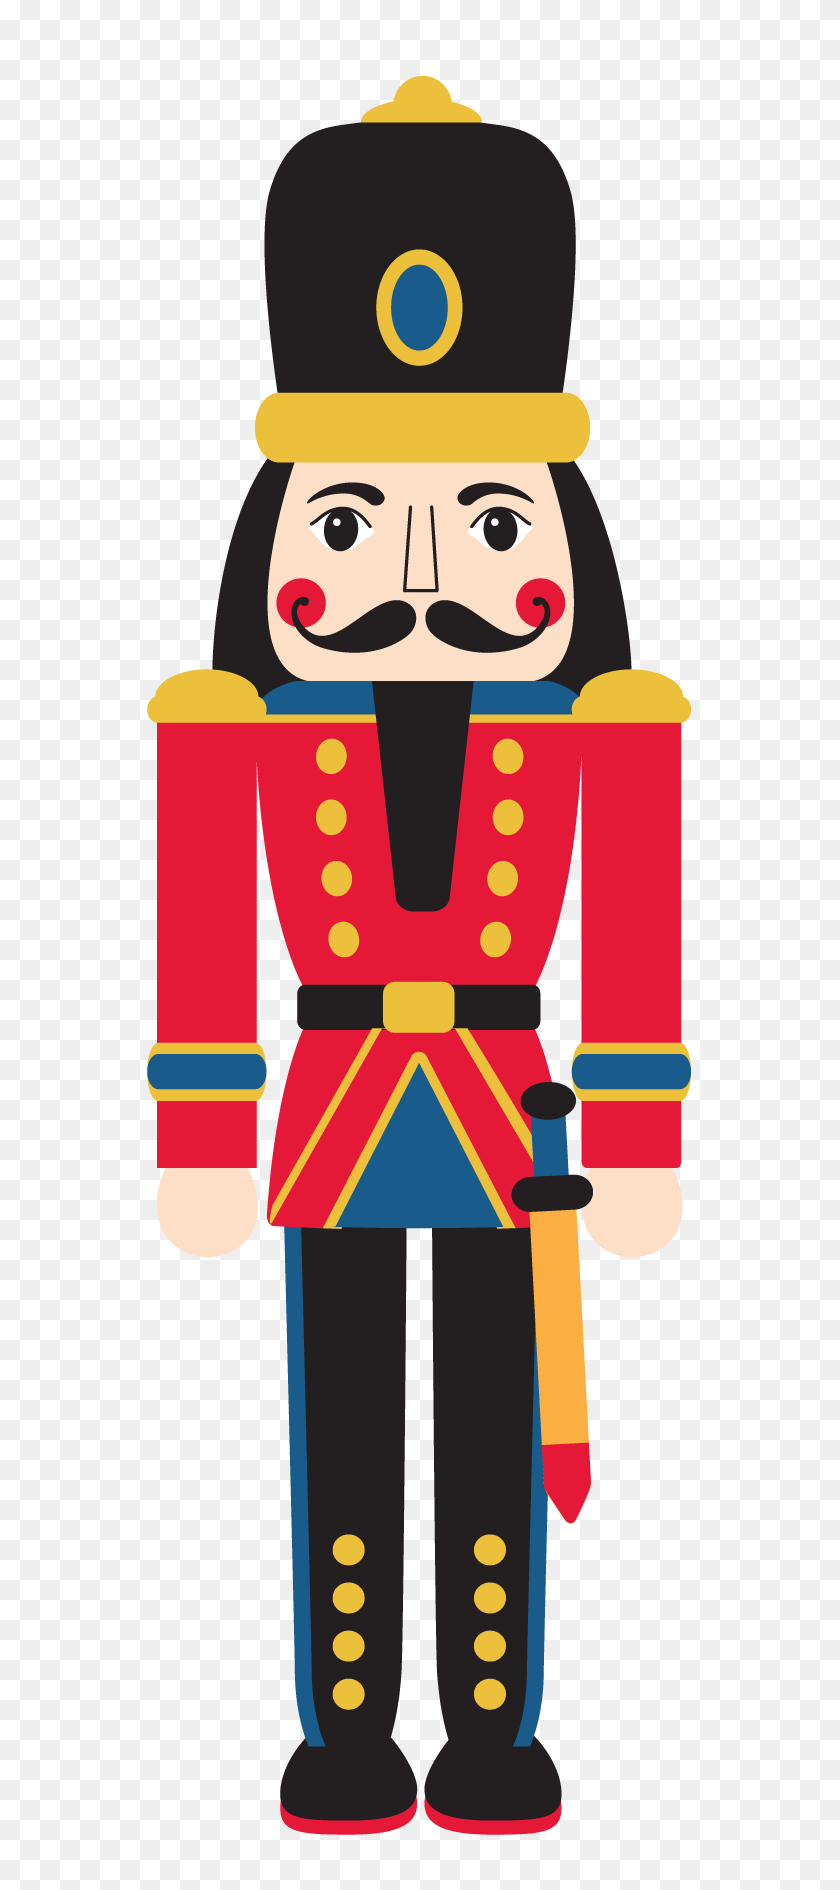 612x1830 Donate To Support The Community Nutcracker Of Jacksonville - Community Outreach Clipart